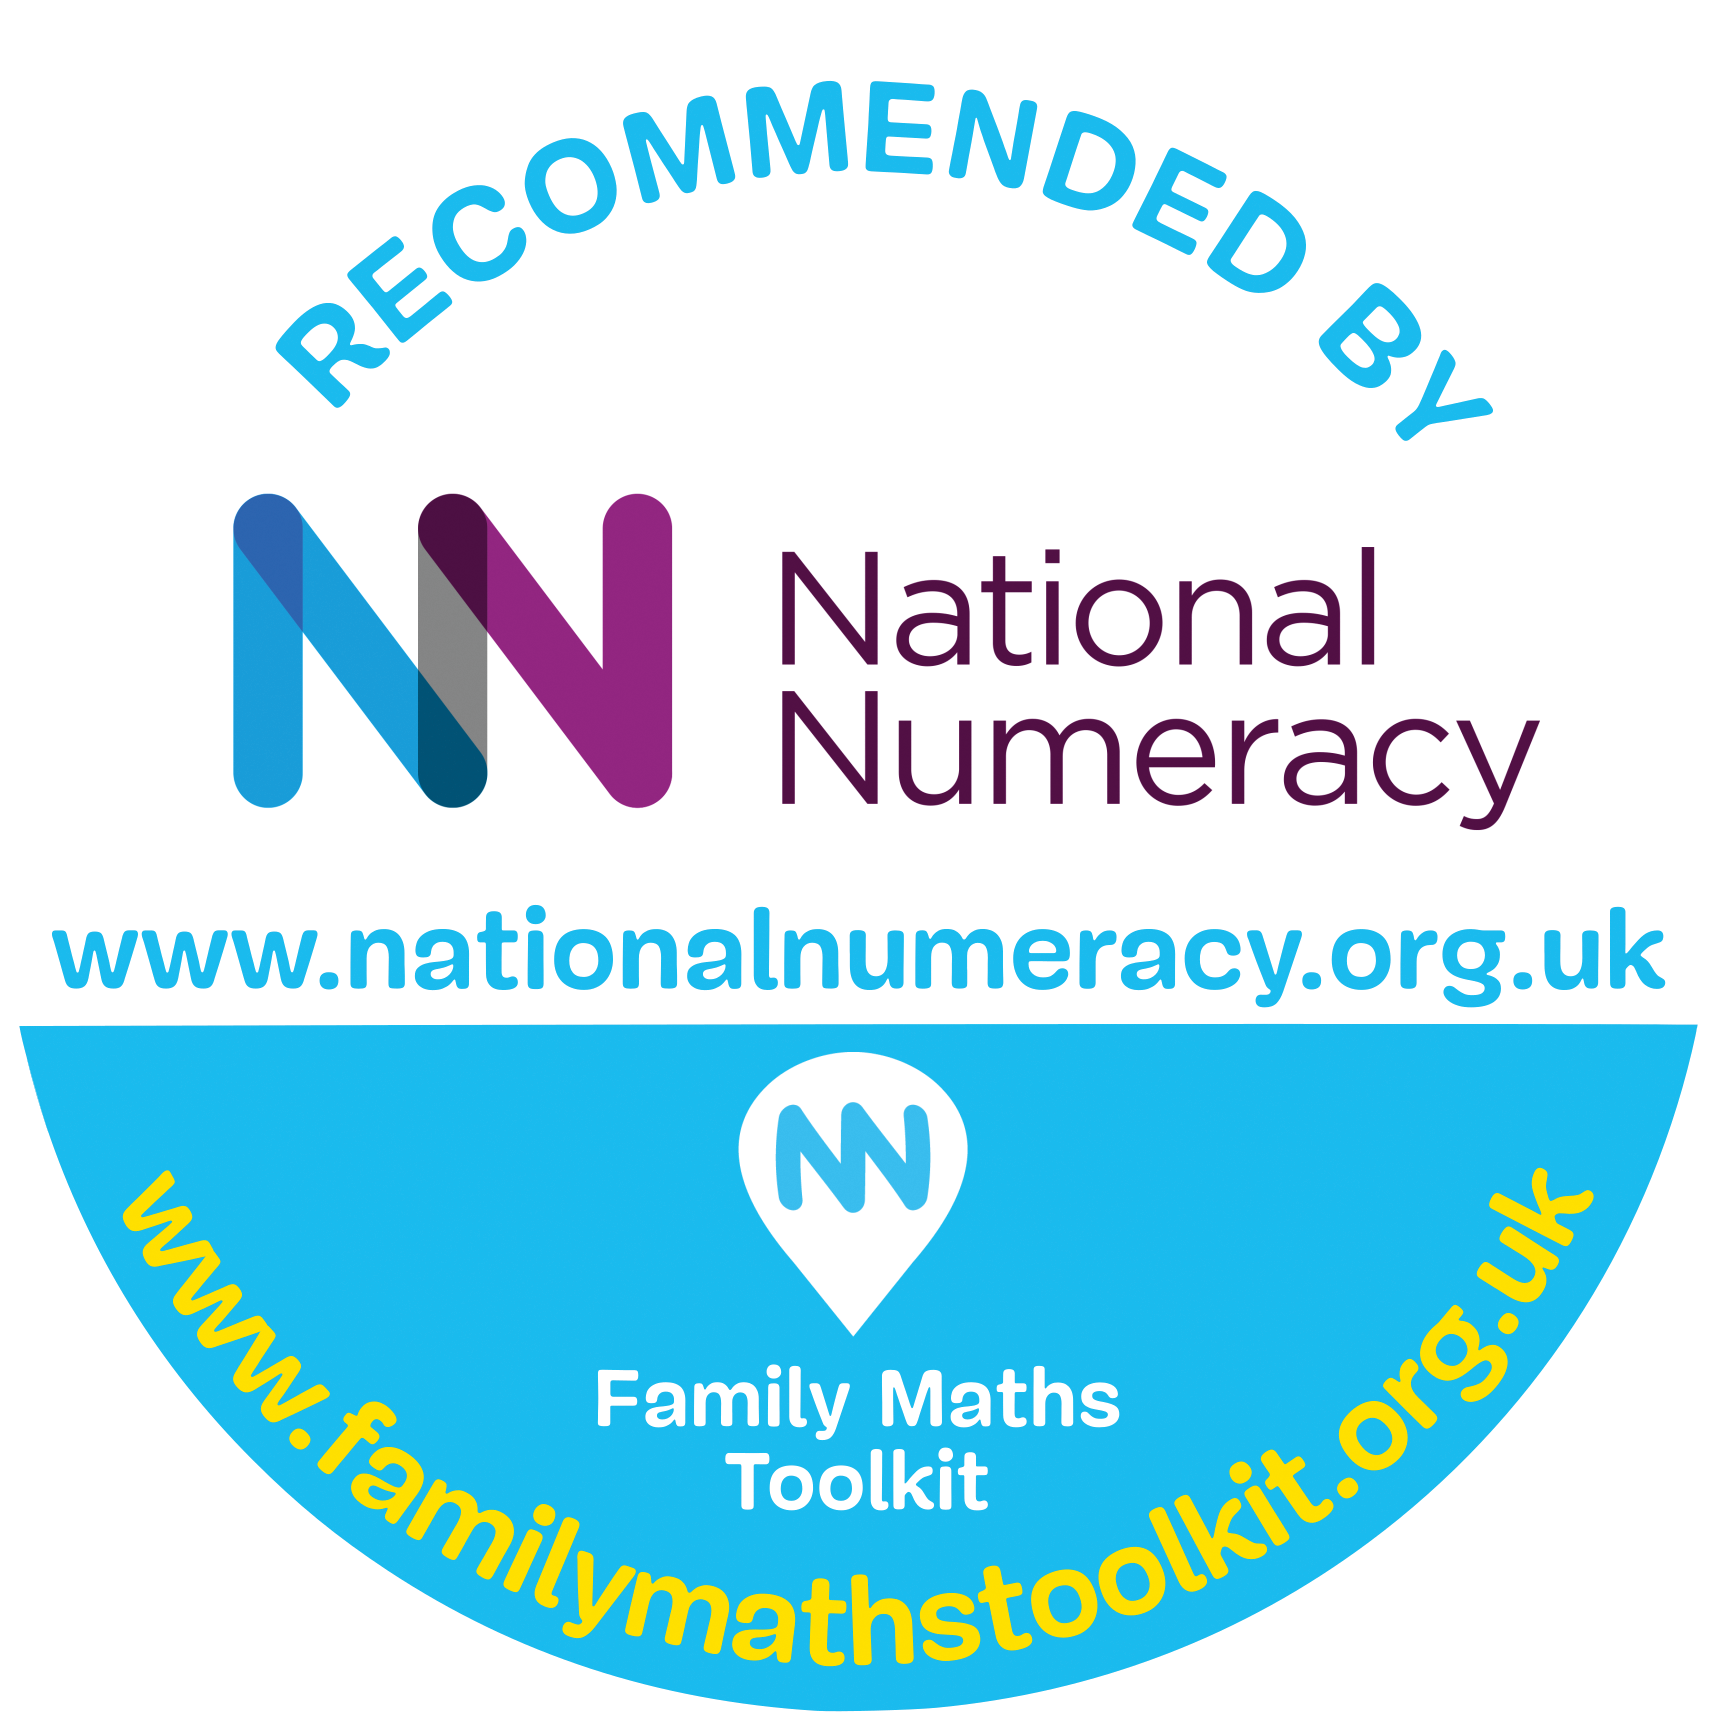 Recommended by National Numeracy